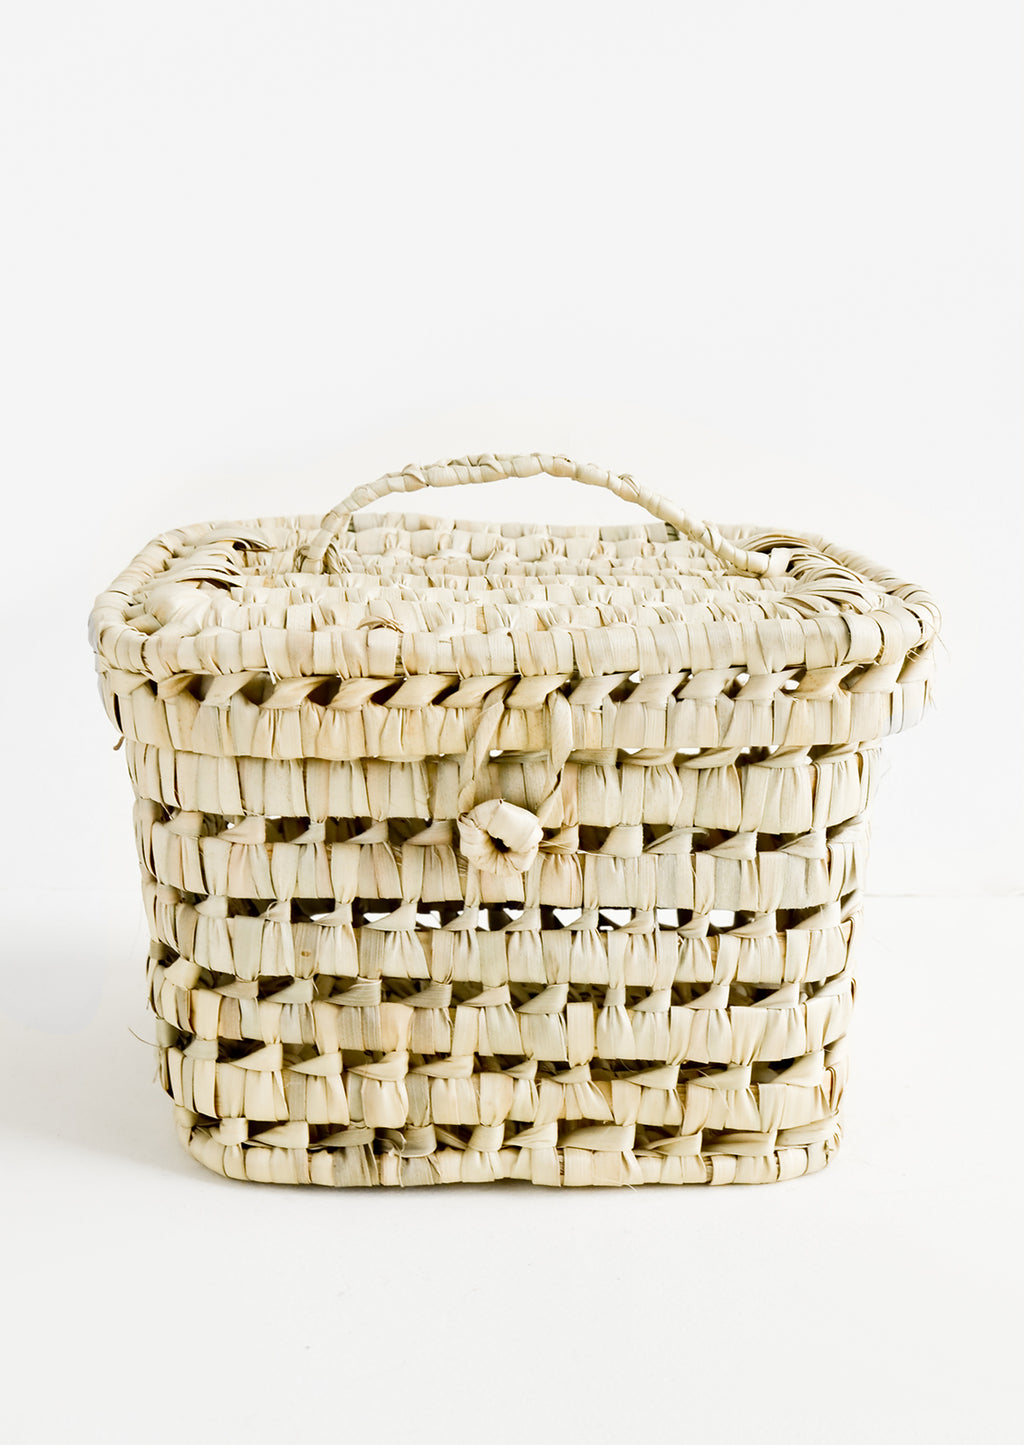 1: A square-shaped, lidded basket made from woven natural palm leaf.